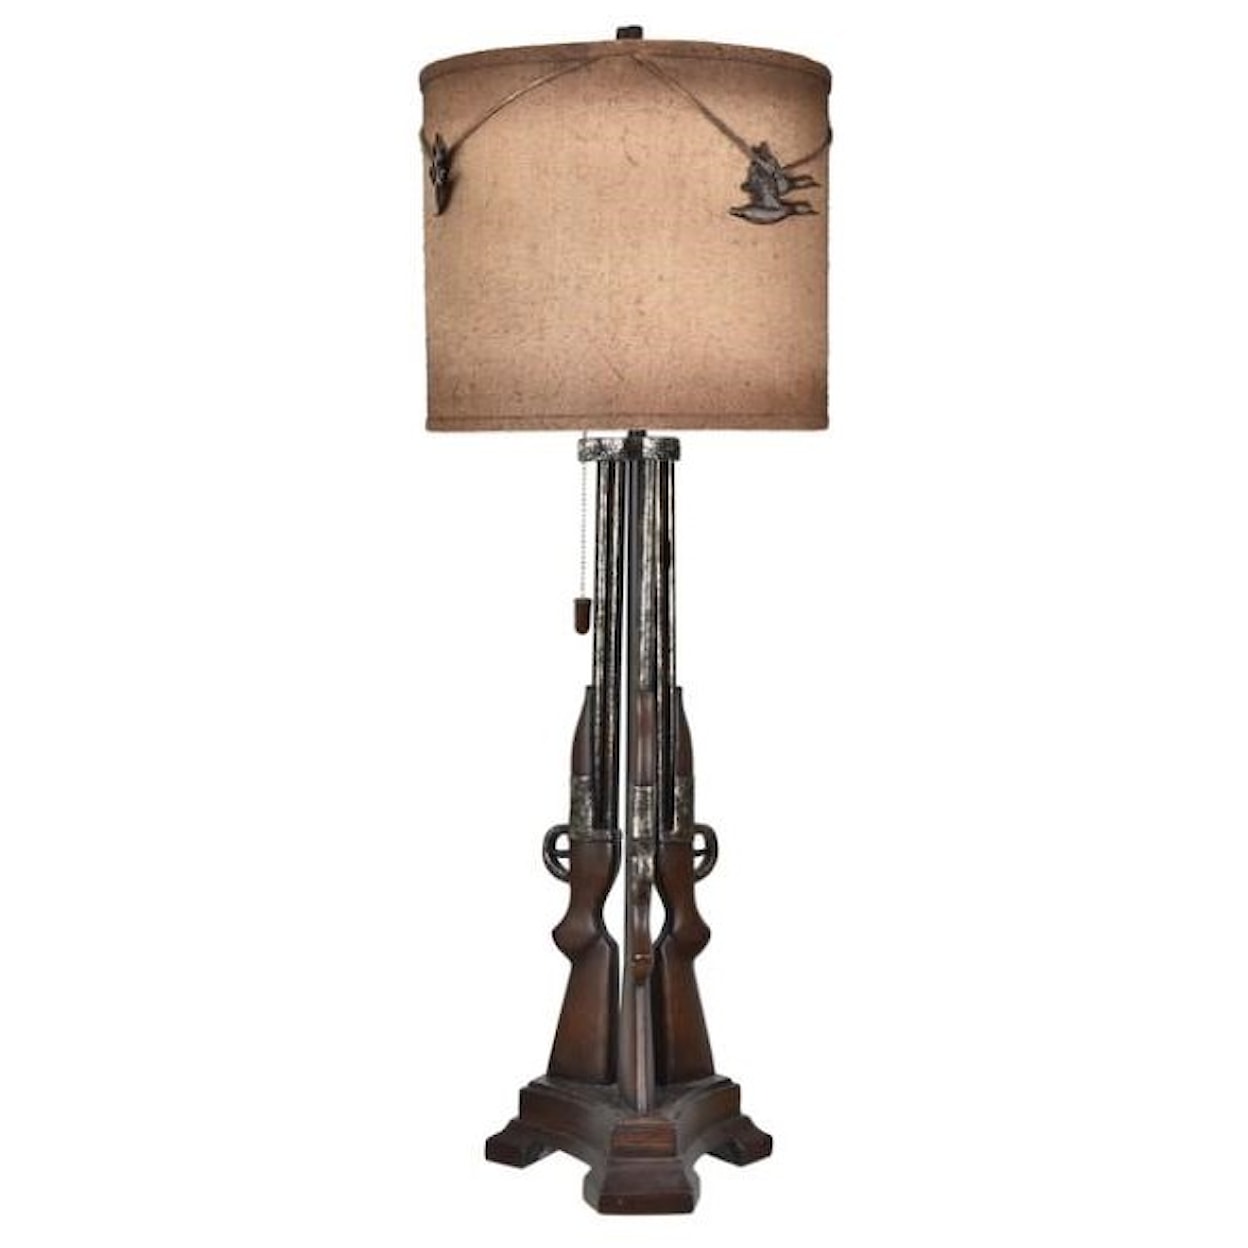 Crestview Collection Lighting Shot Table Lamp